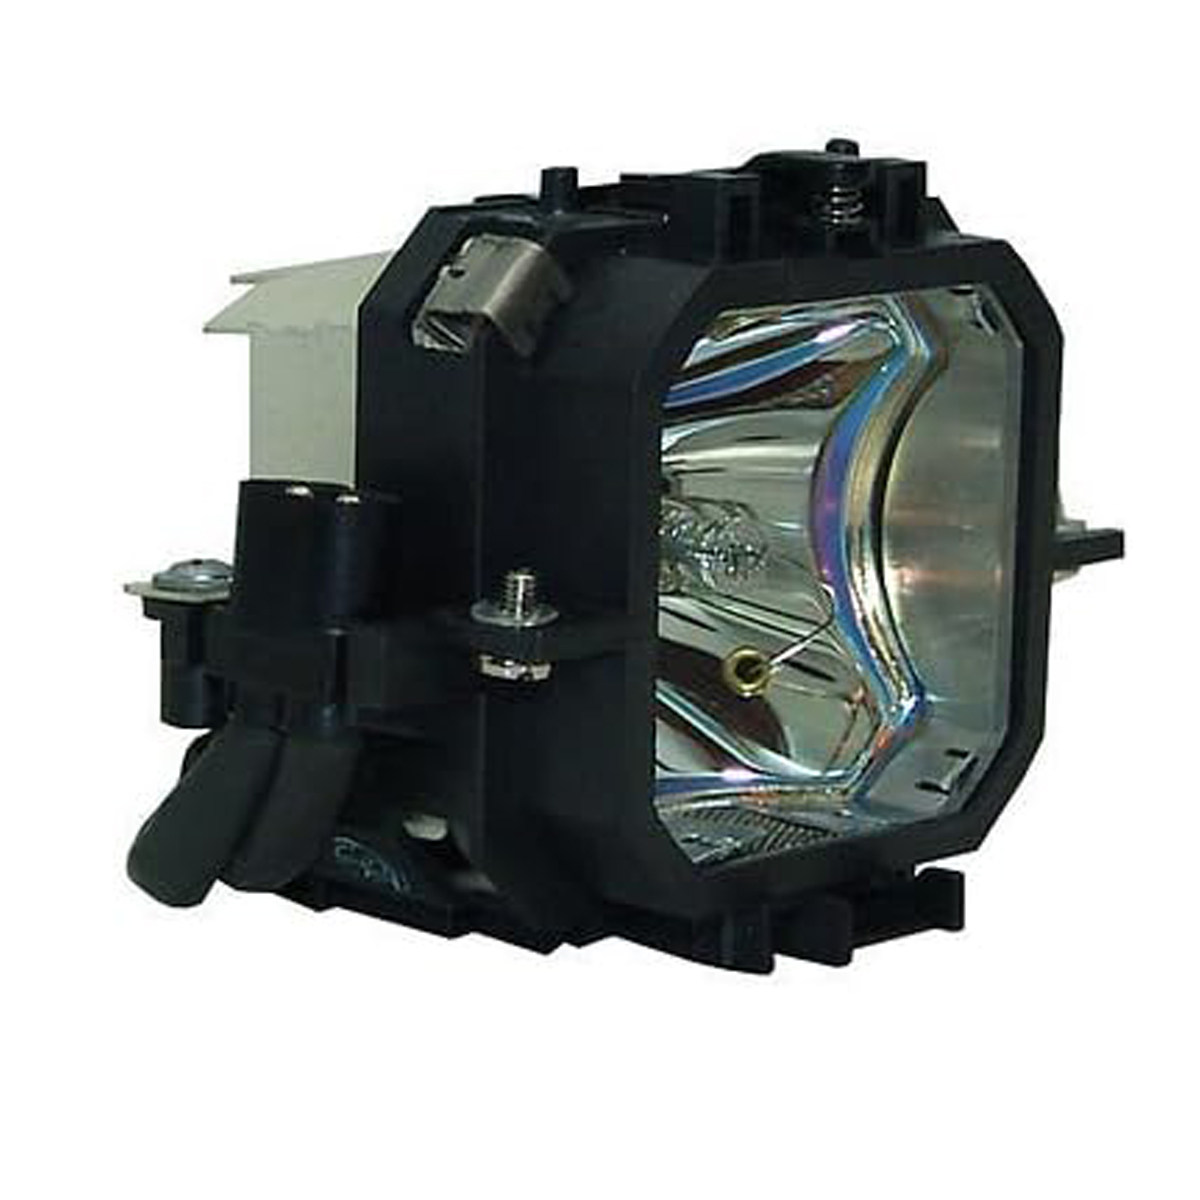 Replacement Projector lamp ELPLP18 For Epson EMP 530  EMP-720 EMP-730 EMP-735